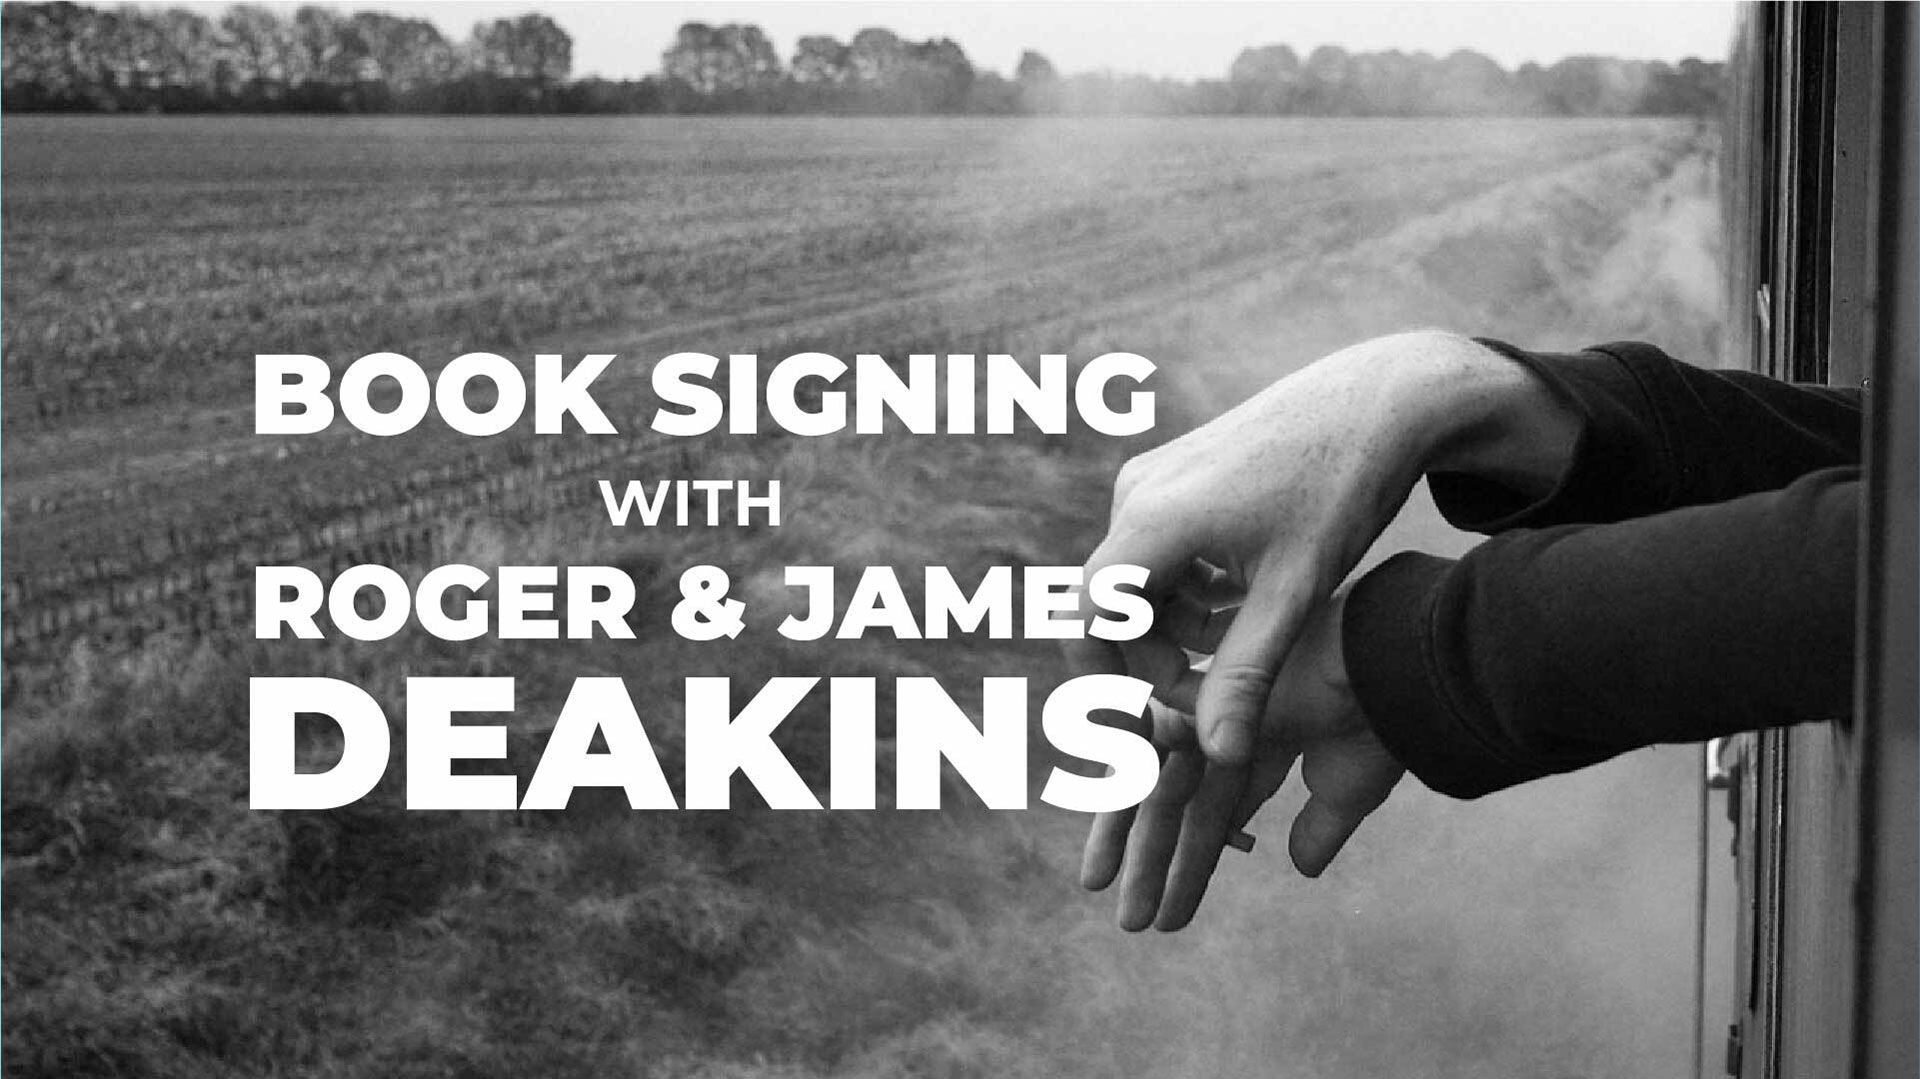 Book Signing with Roger & James Deakins